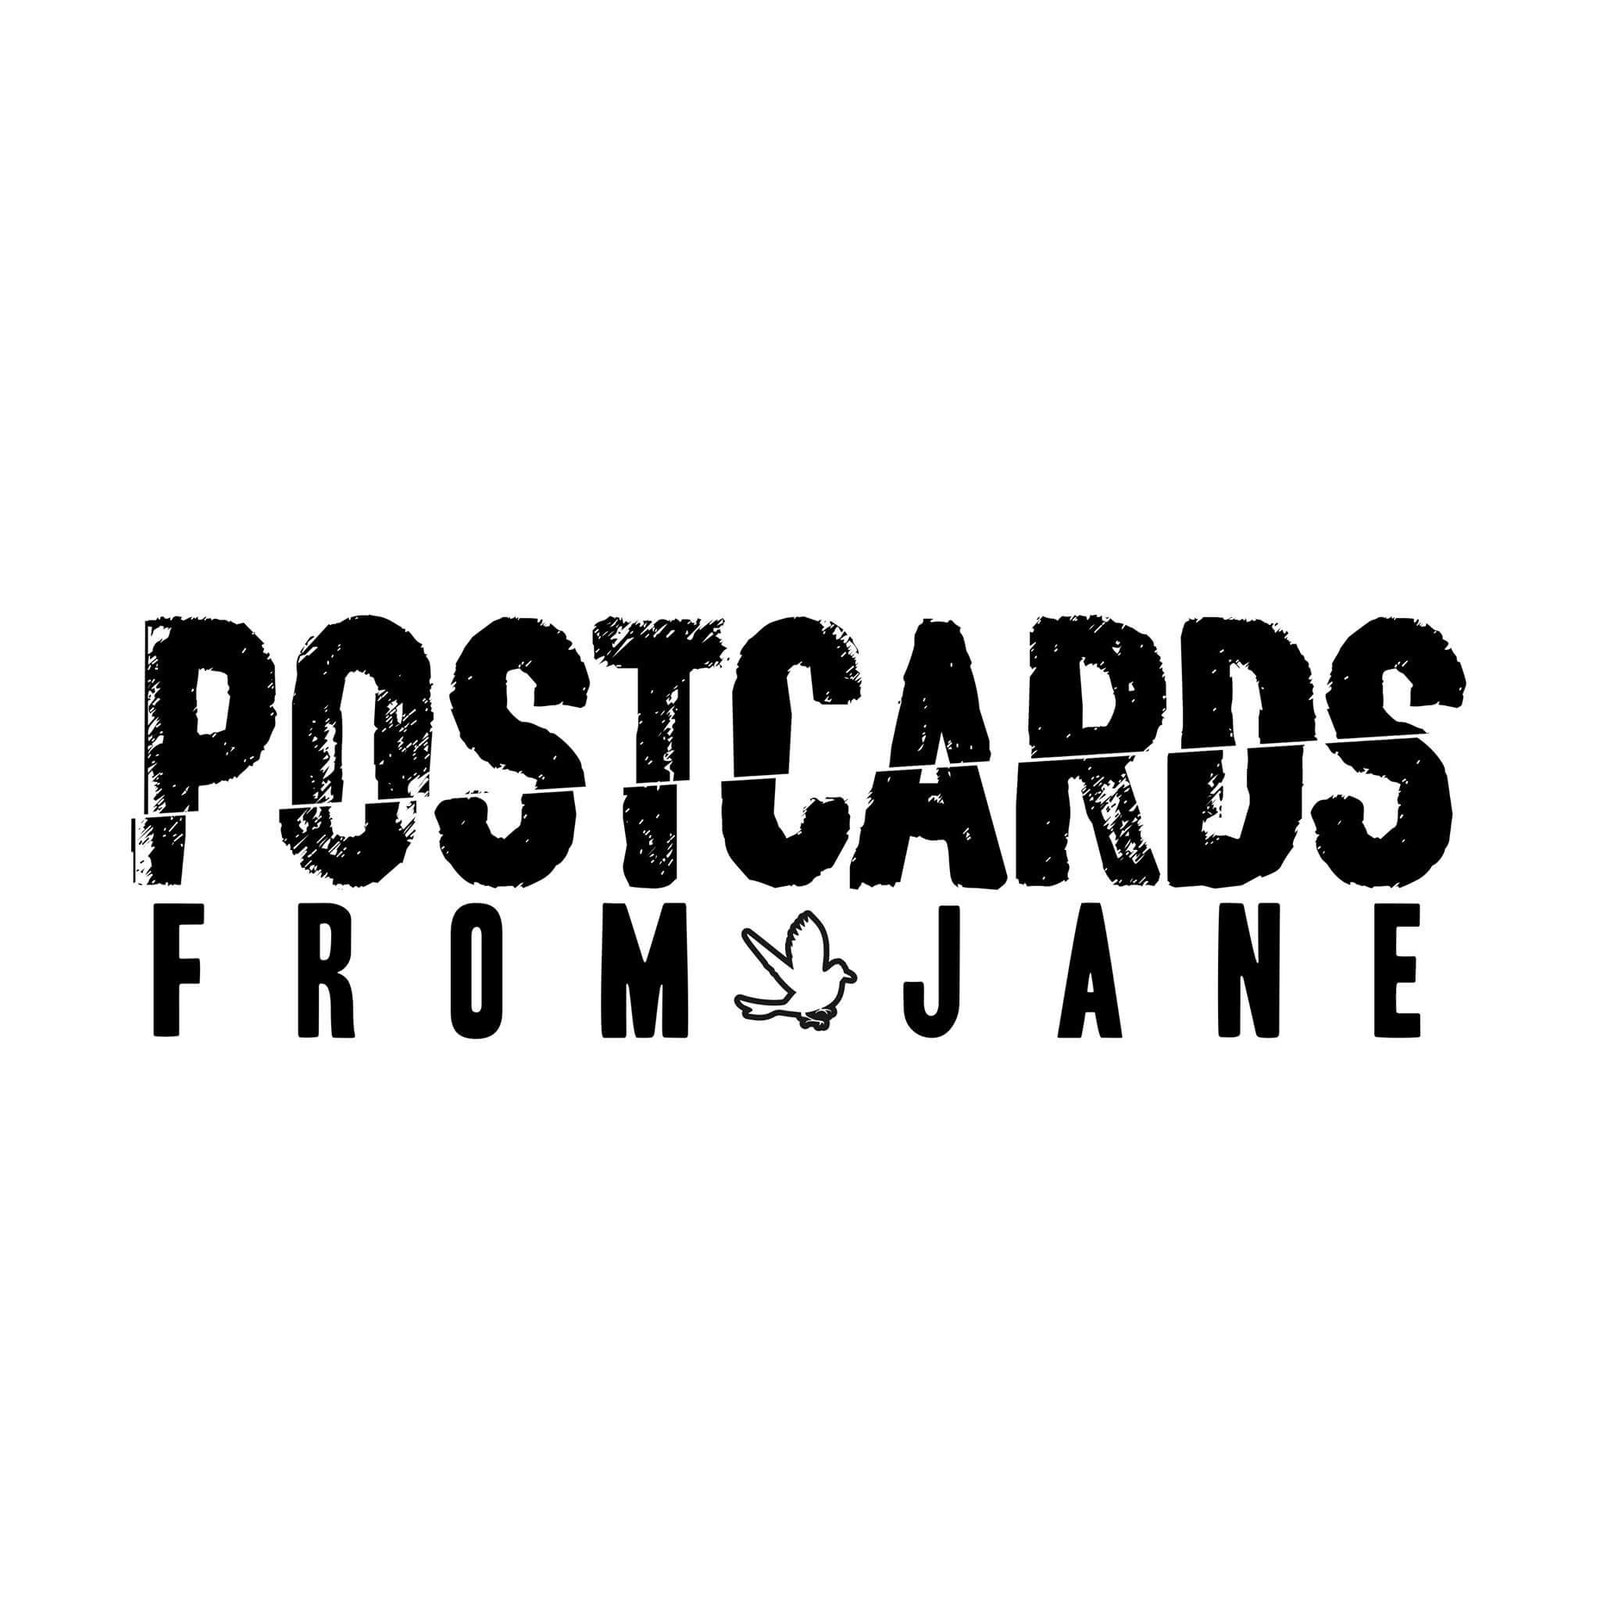 Postcards From Jane